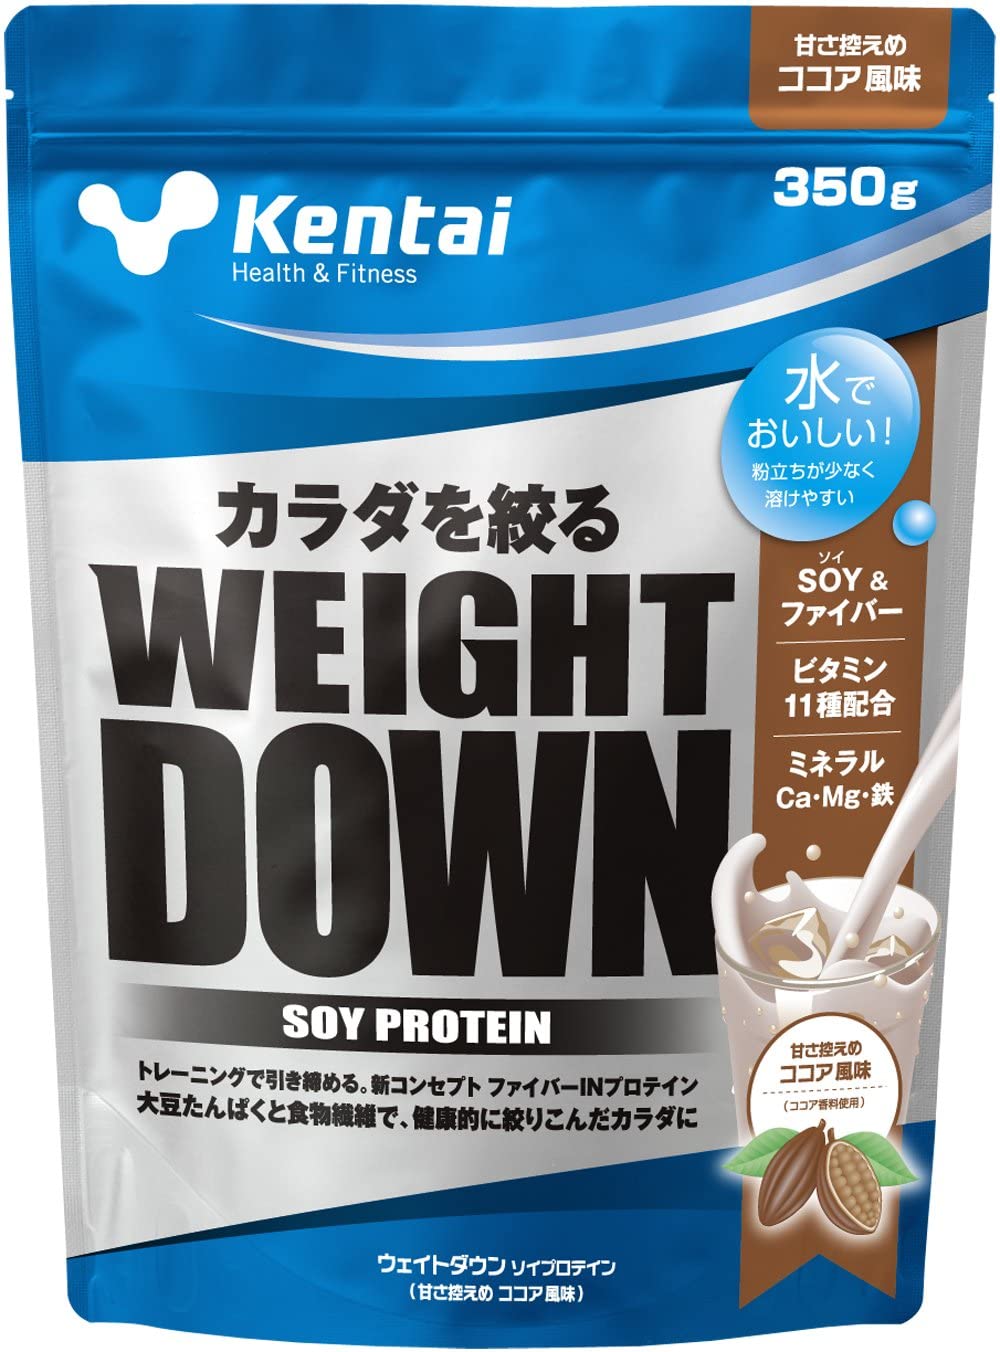 WEIGHT DOWN SOY PROTEINのプロテイン画像